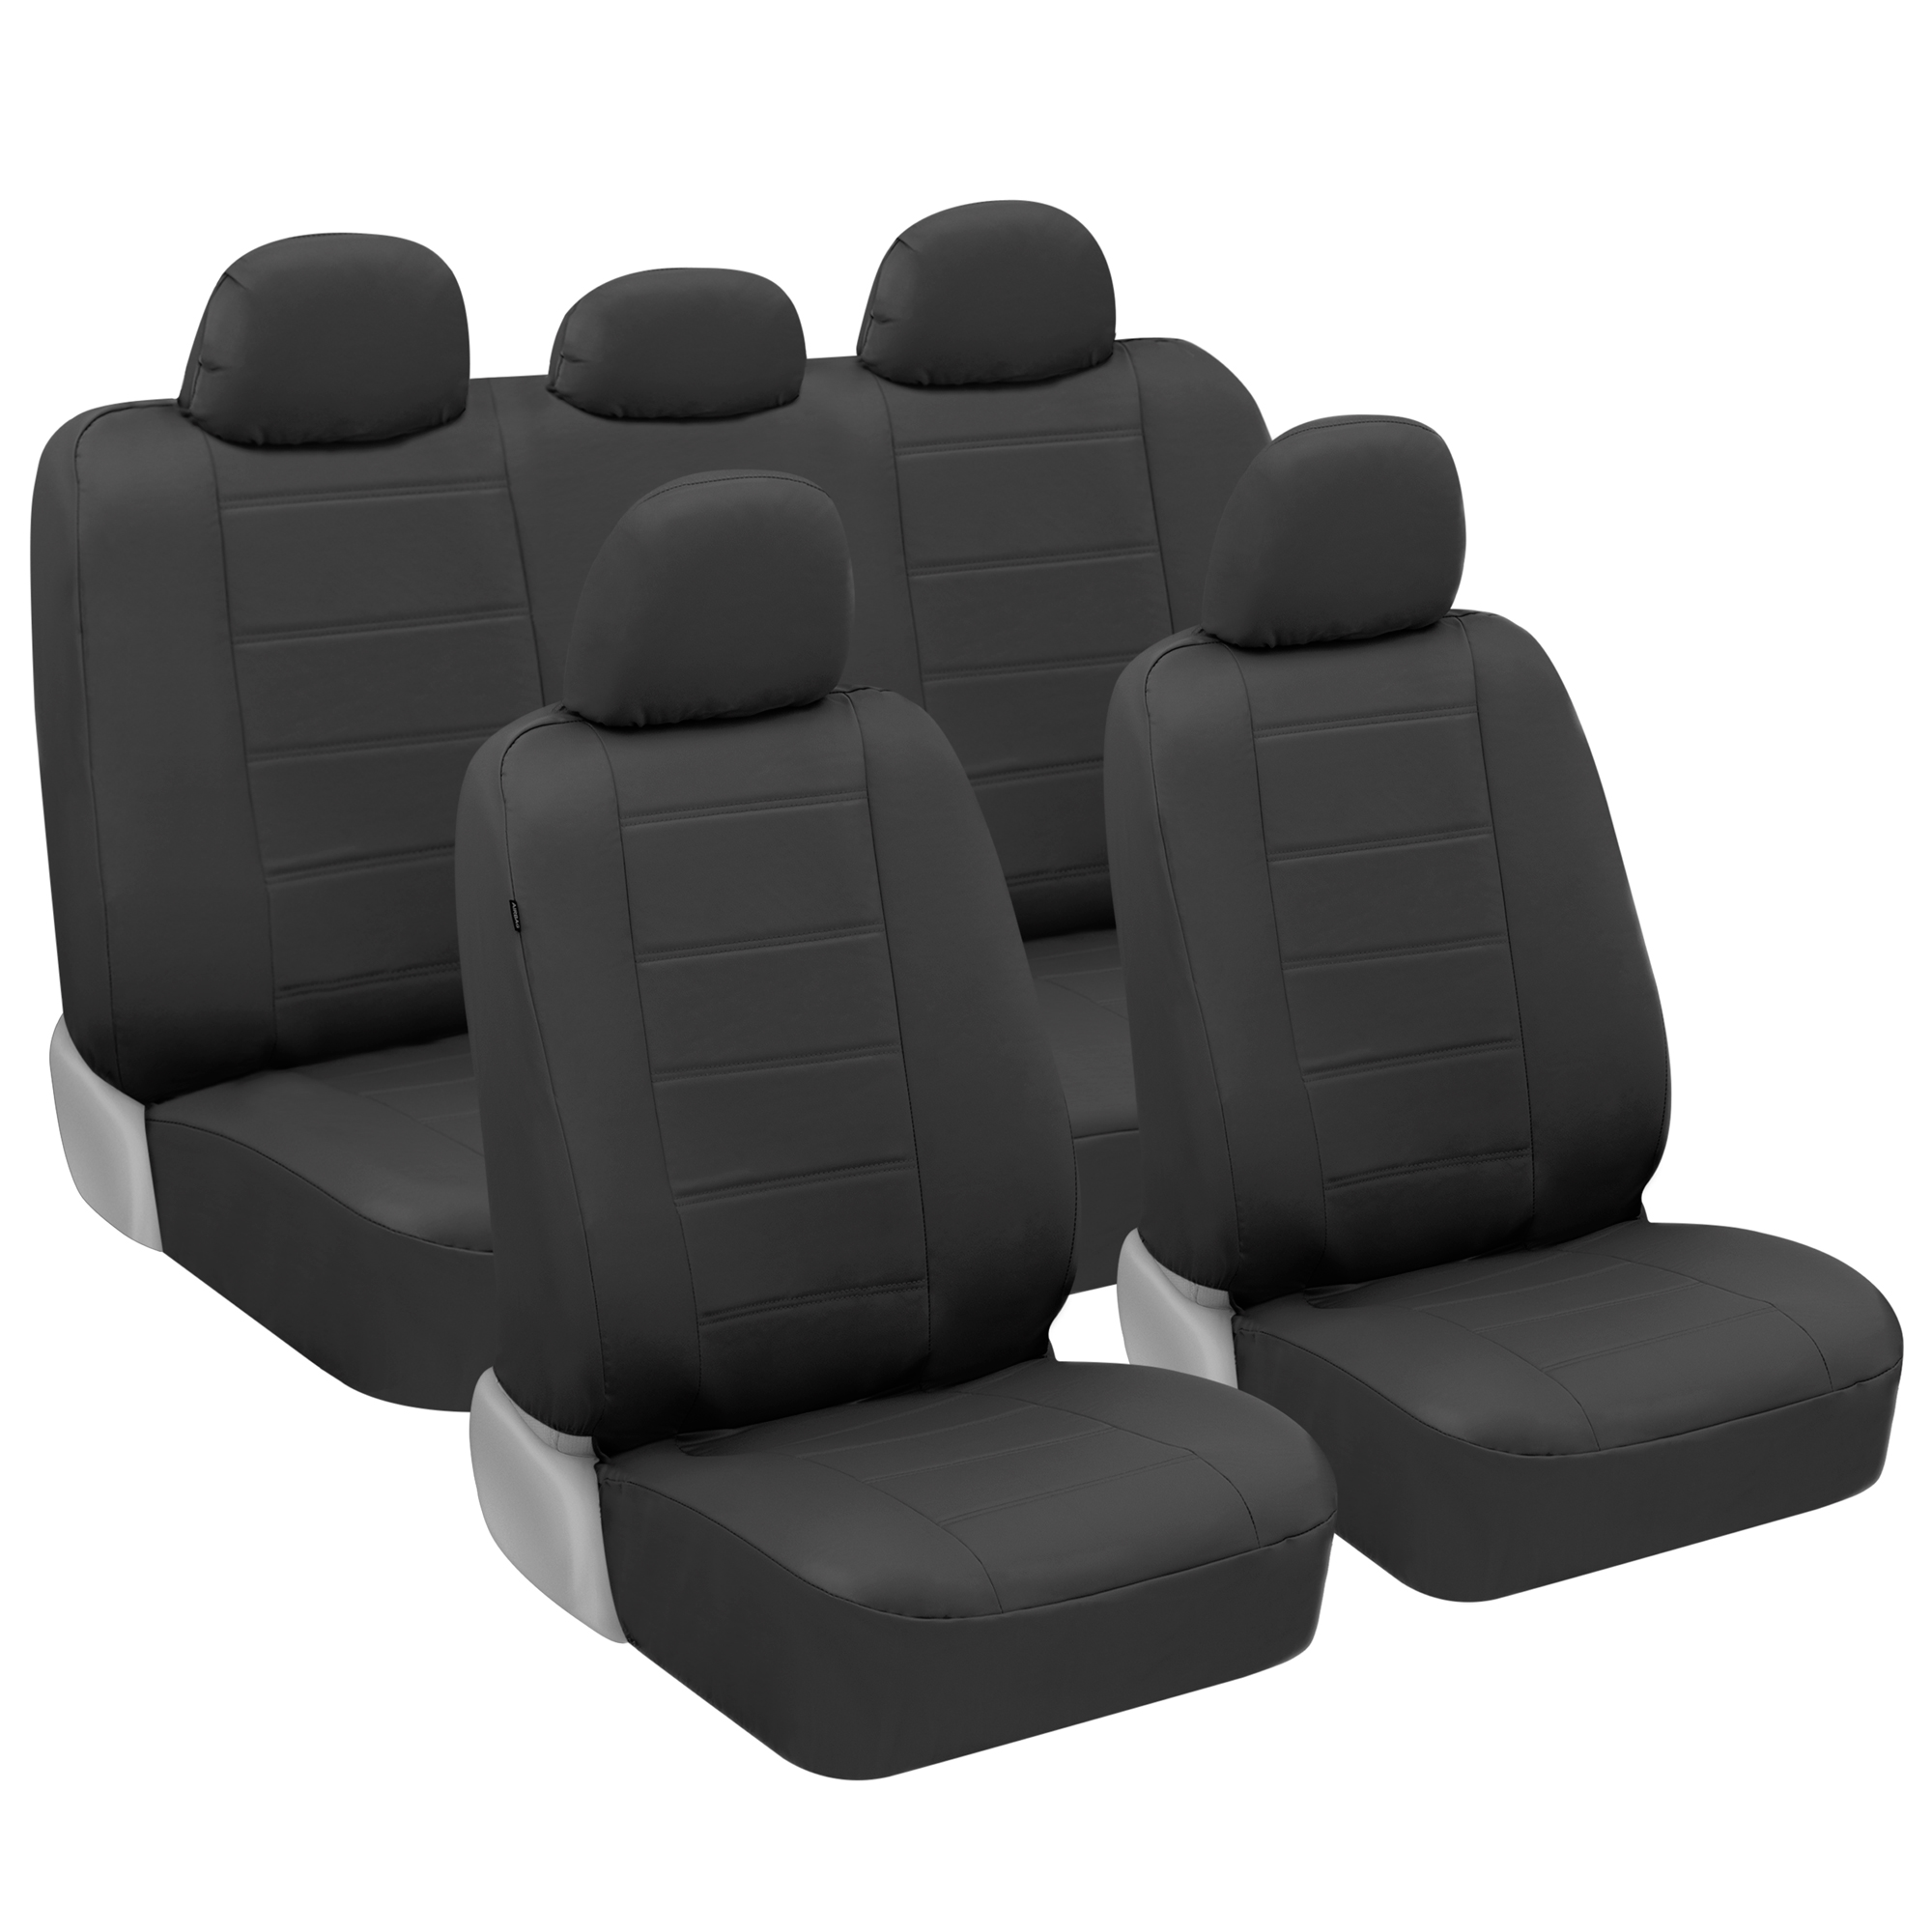 carXS UltraLuxe Black Faux Leather Car Seat Covers Full Set, Front & Rear Bench Seat Cover for Cars Trucks SUV - image 1 of 8